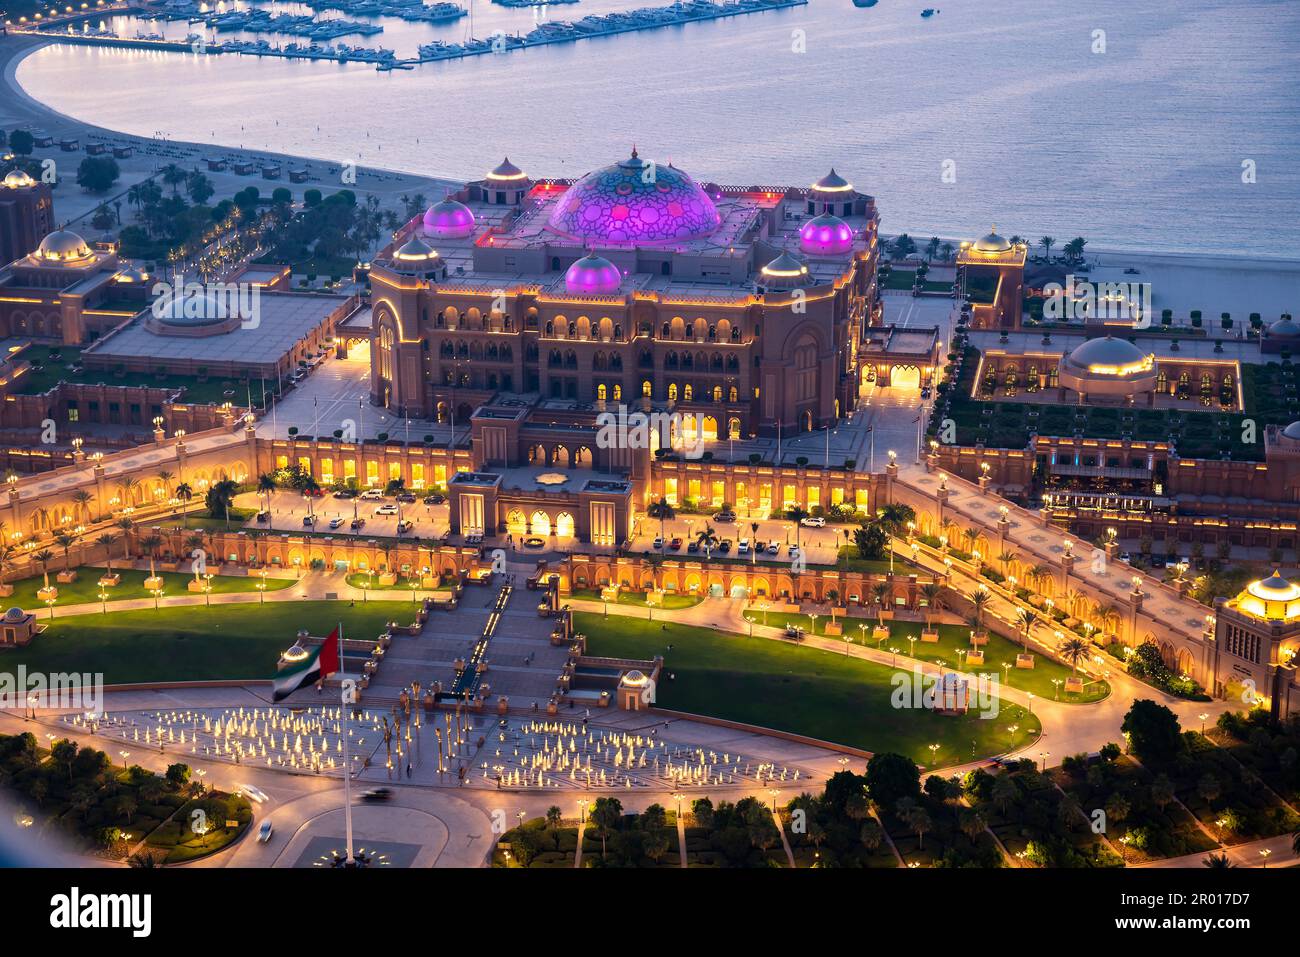 Emirates palace in Abu Dhabi , high angle view of one of the famous travel spots and landmarks in United Arab Emirates capital city at dusk Stock Photo